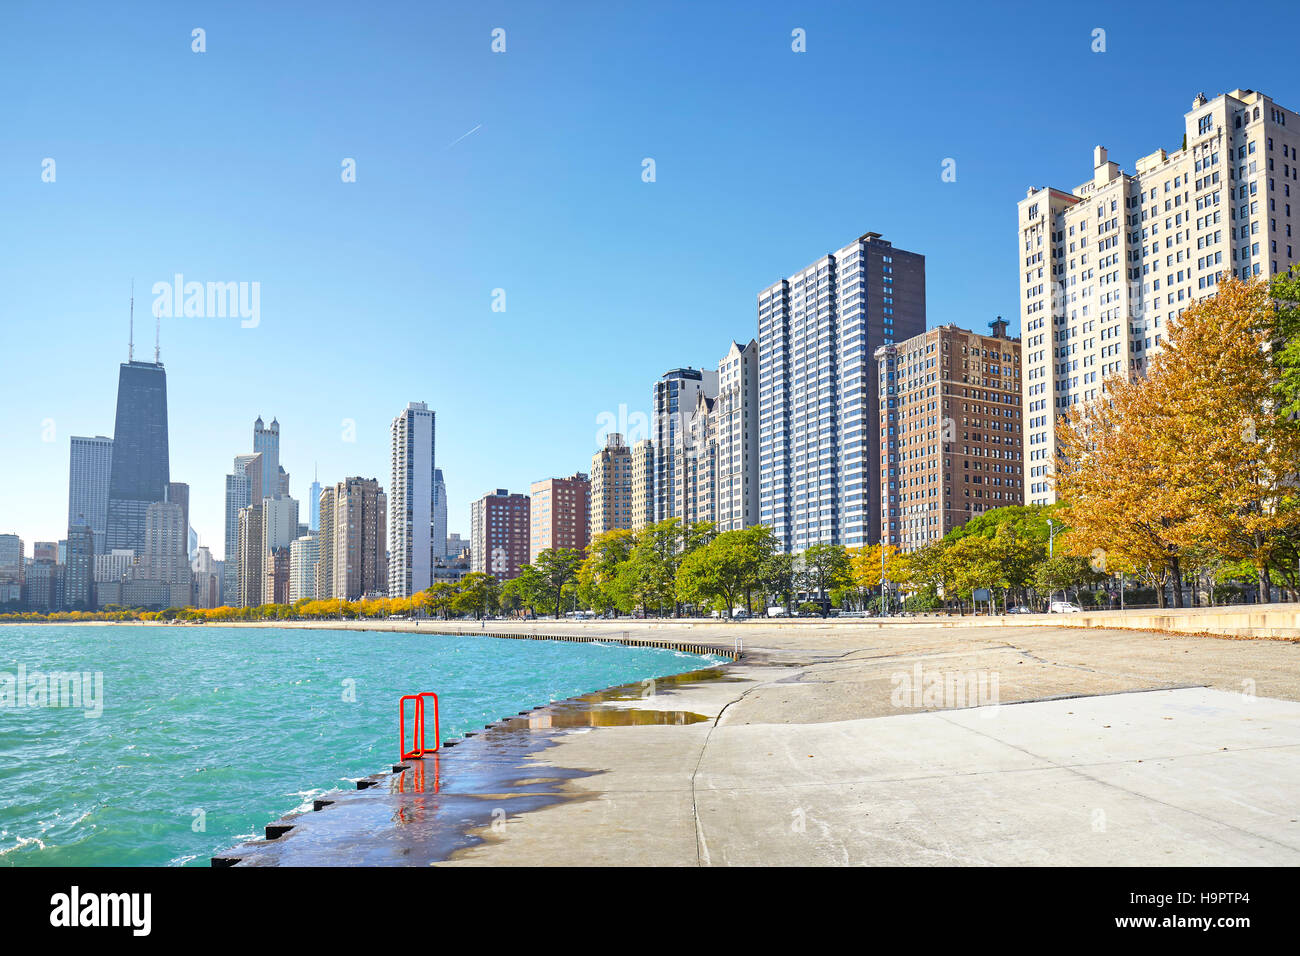 Early morning view of the Michigan Lakefront Trail in Chicago city, Illinois, USA. Stock Photo